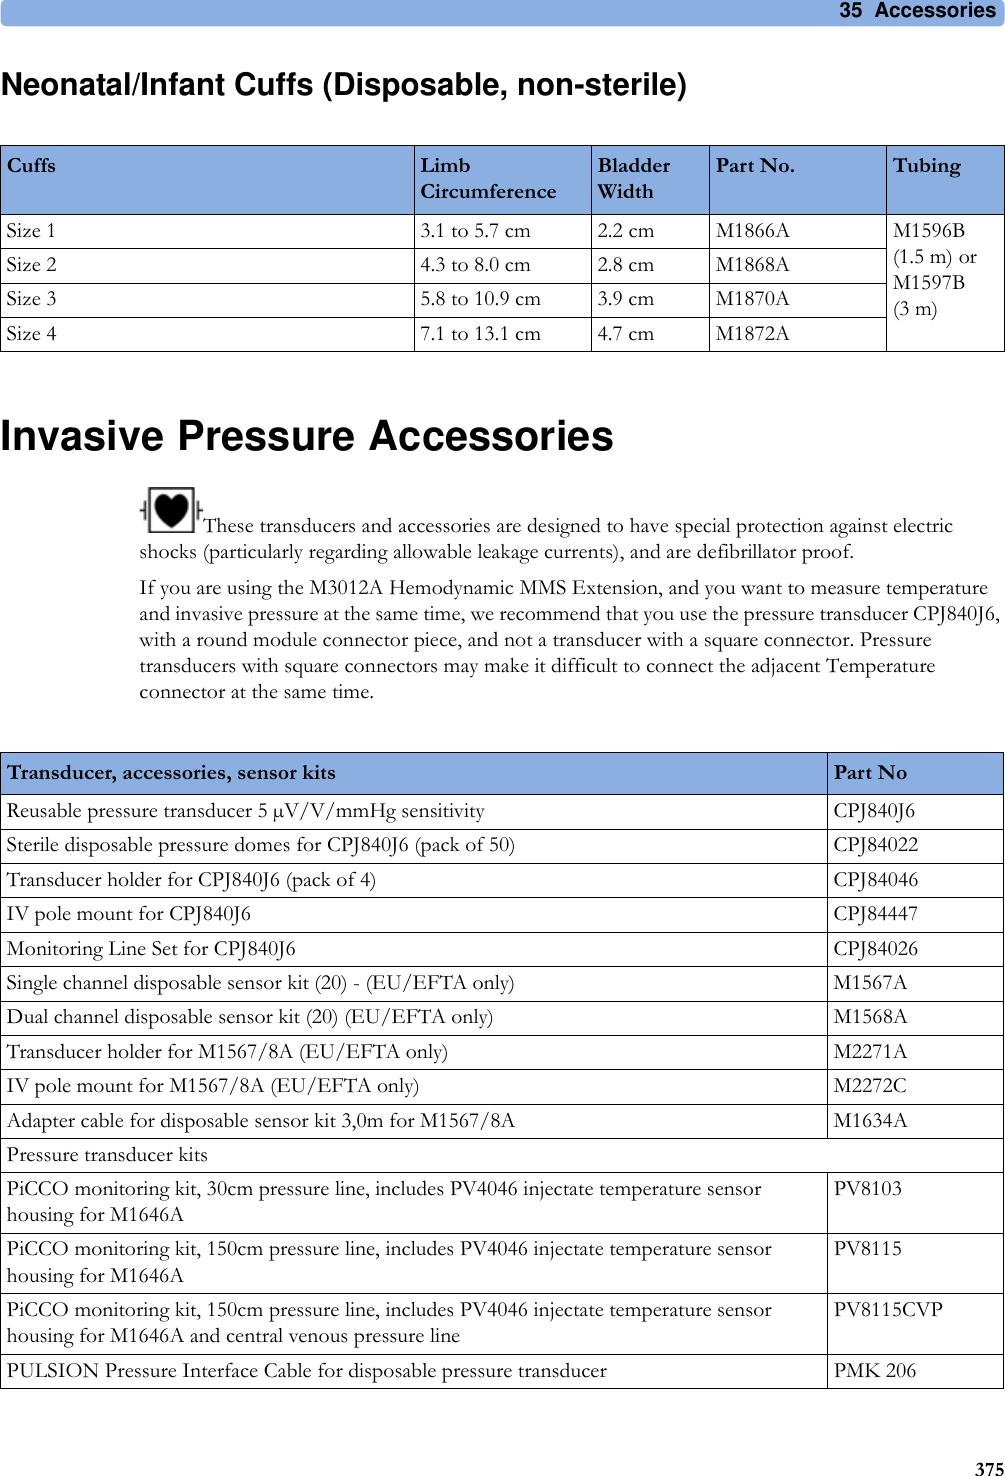 35 Accessories375Neonatal/Infant Cuffs (Disposable, non-sterile)Invasive Pressure AccessoriesThese transducers and accessories are designed to have special protection against electric shocks (particularly regarding allowable leakage currents), and are defibrillator proof.If you are using the M3012A Hemodynamic MMS Extension, and you want to measure temperature and invasive pressure at the same time, we recommend that you use the pressure transducer CPJ840J6, with a round module connector piece, and not a transducer with a square connector. Pressure transducers with square connectors may make it difficult to connect the adjacent Temperature connector at the same time.Cuffs Limb CircumferenceBladder WidthPart No. TubingSize 1 3.1 to 5.7 cm 2.2 cm M1866A M1596B (1.5 m) or M1597B (3 m)Size 2 4.3 to 8.0 cm 2.8 cm M1868ASize 3 5.8 to 10.9 cm 3.9 cm M1870ASize 4 7.1 to 13.1 cm 4.7 cm M1872ATransducer, accessories, sensor kits Part NoReusable pressure transducer 5 µV/V/mmHg sensitivity CPJ840J6Sterile disposable pressure domes for CPJ840J6 (pack of 50) CPJ84022Transducer holder for CPJ840J6 (pack of 4) CPJ84046IV pole mount for CPJ840J6 CPJ84447Monitoring Line Set for CPJ840J6 CPJ84026Single channel disposable sensor kit (20) - (EU/EFTA only) M1567ADual channel disposable sensor kit (20) (EU/EFTA only) M1568ATransducer holder for M1567/8A (EU/EFTA only) M2271AIV pole mount for M1567/8A (EU/EFTA only) M2272CAdapter cable for disposable sensor kit 3,0m for M1567/8A M1634APressure transducer kitsPiCCO monitoring kit, 30cm pressure line, includes PV4046 injectate temperature sensor housing for M1646APV8103PiCCO monitoring kit, 150cm pressure line, includes PV4046 injectate temperature sensor housing for M1646APV8115PiCCO monitoring kit, 150cm pressure line, includes PV4046 injectate temperature sensor housing for M1646A and central venous pressure linePV8115CVPPULSION Pressure Interface Cable for disposable pressure transducer PMK 206